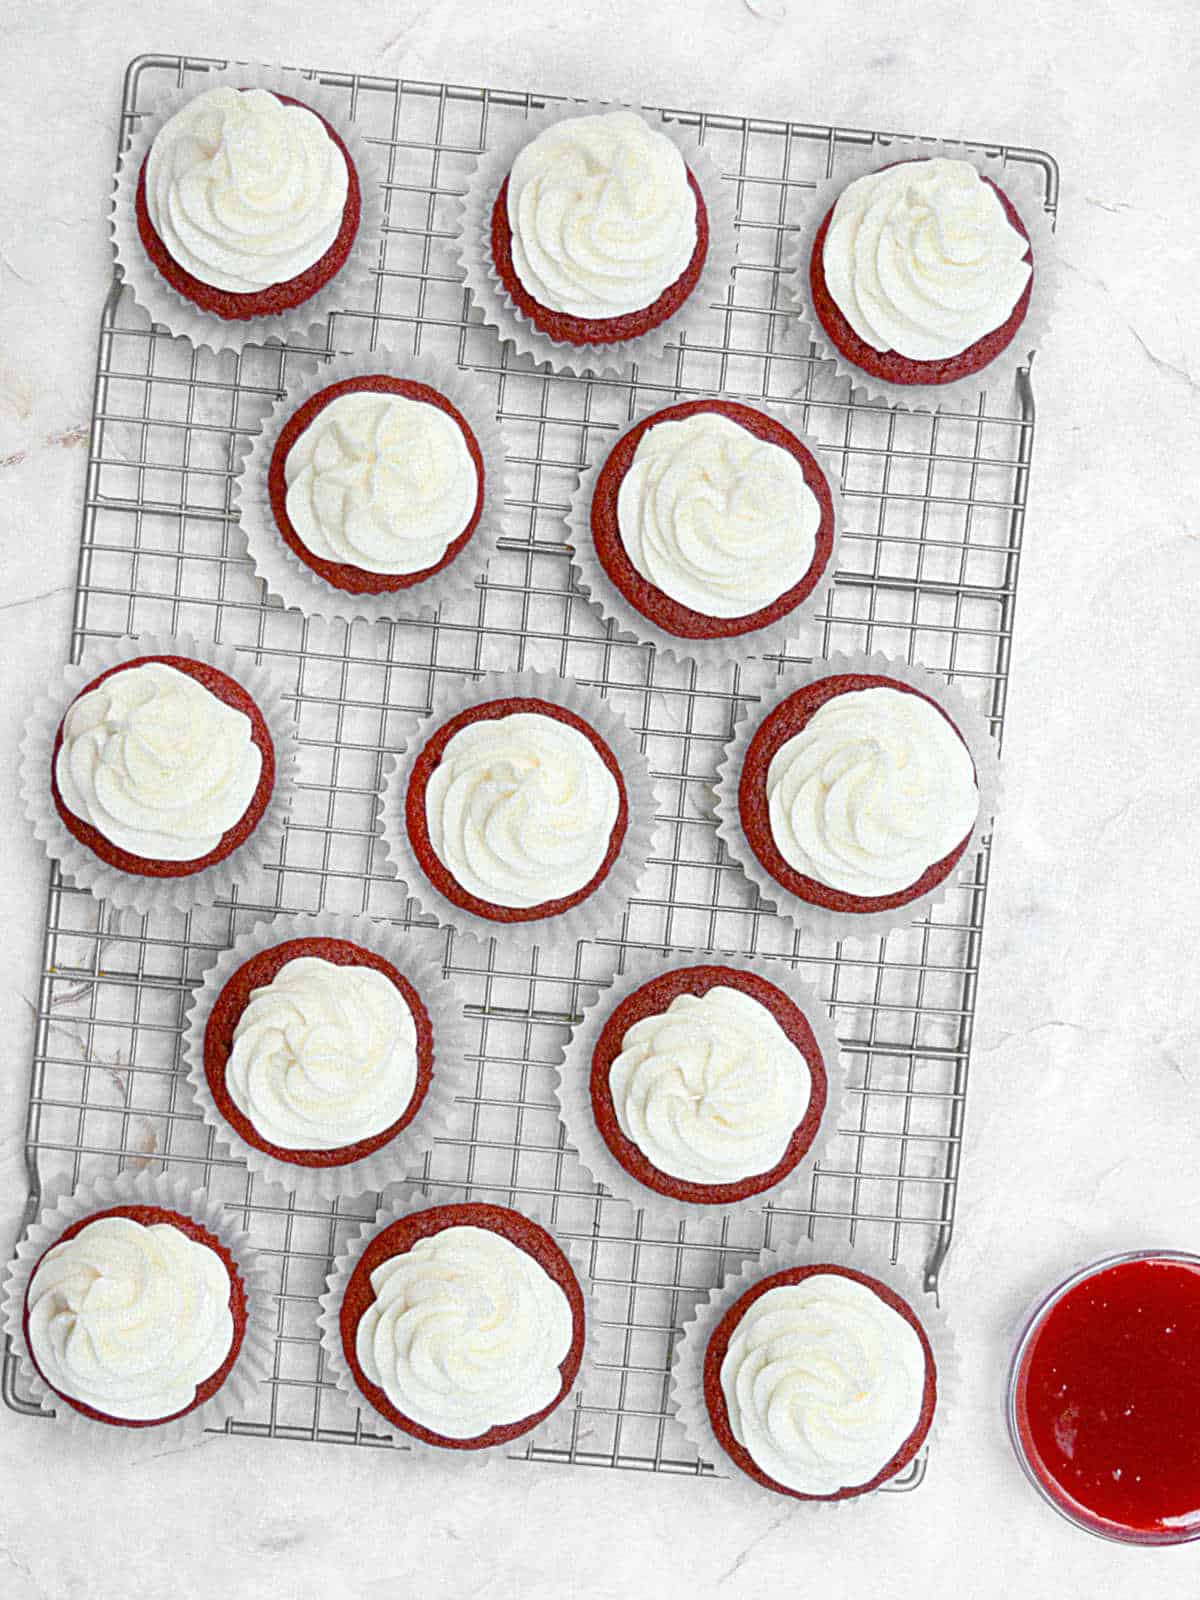 Frosted red velvet cupcakes on a wire rack on a white marbled surface. Bowl with raspberry sauce.